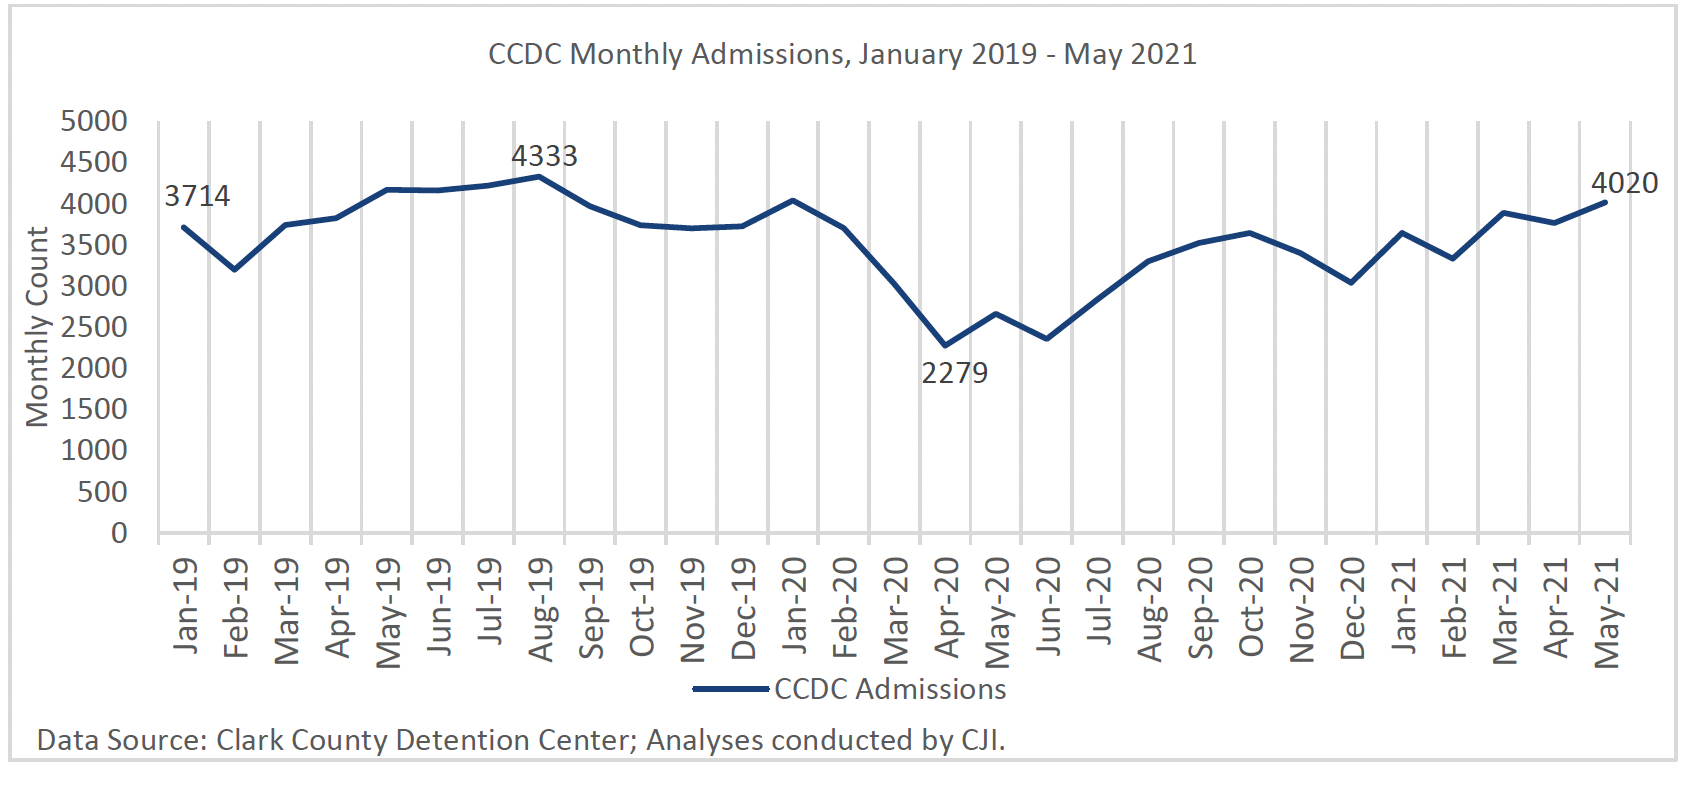 View of monthly CCDC admissions declined rapidly in Spring 2020 but gradually returned to pre-pandemic levels 